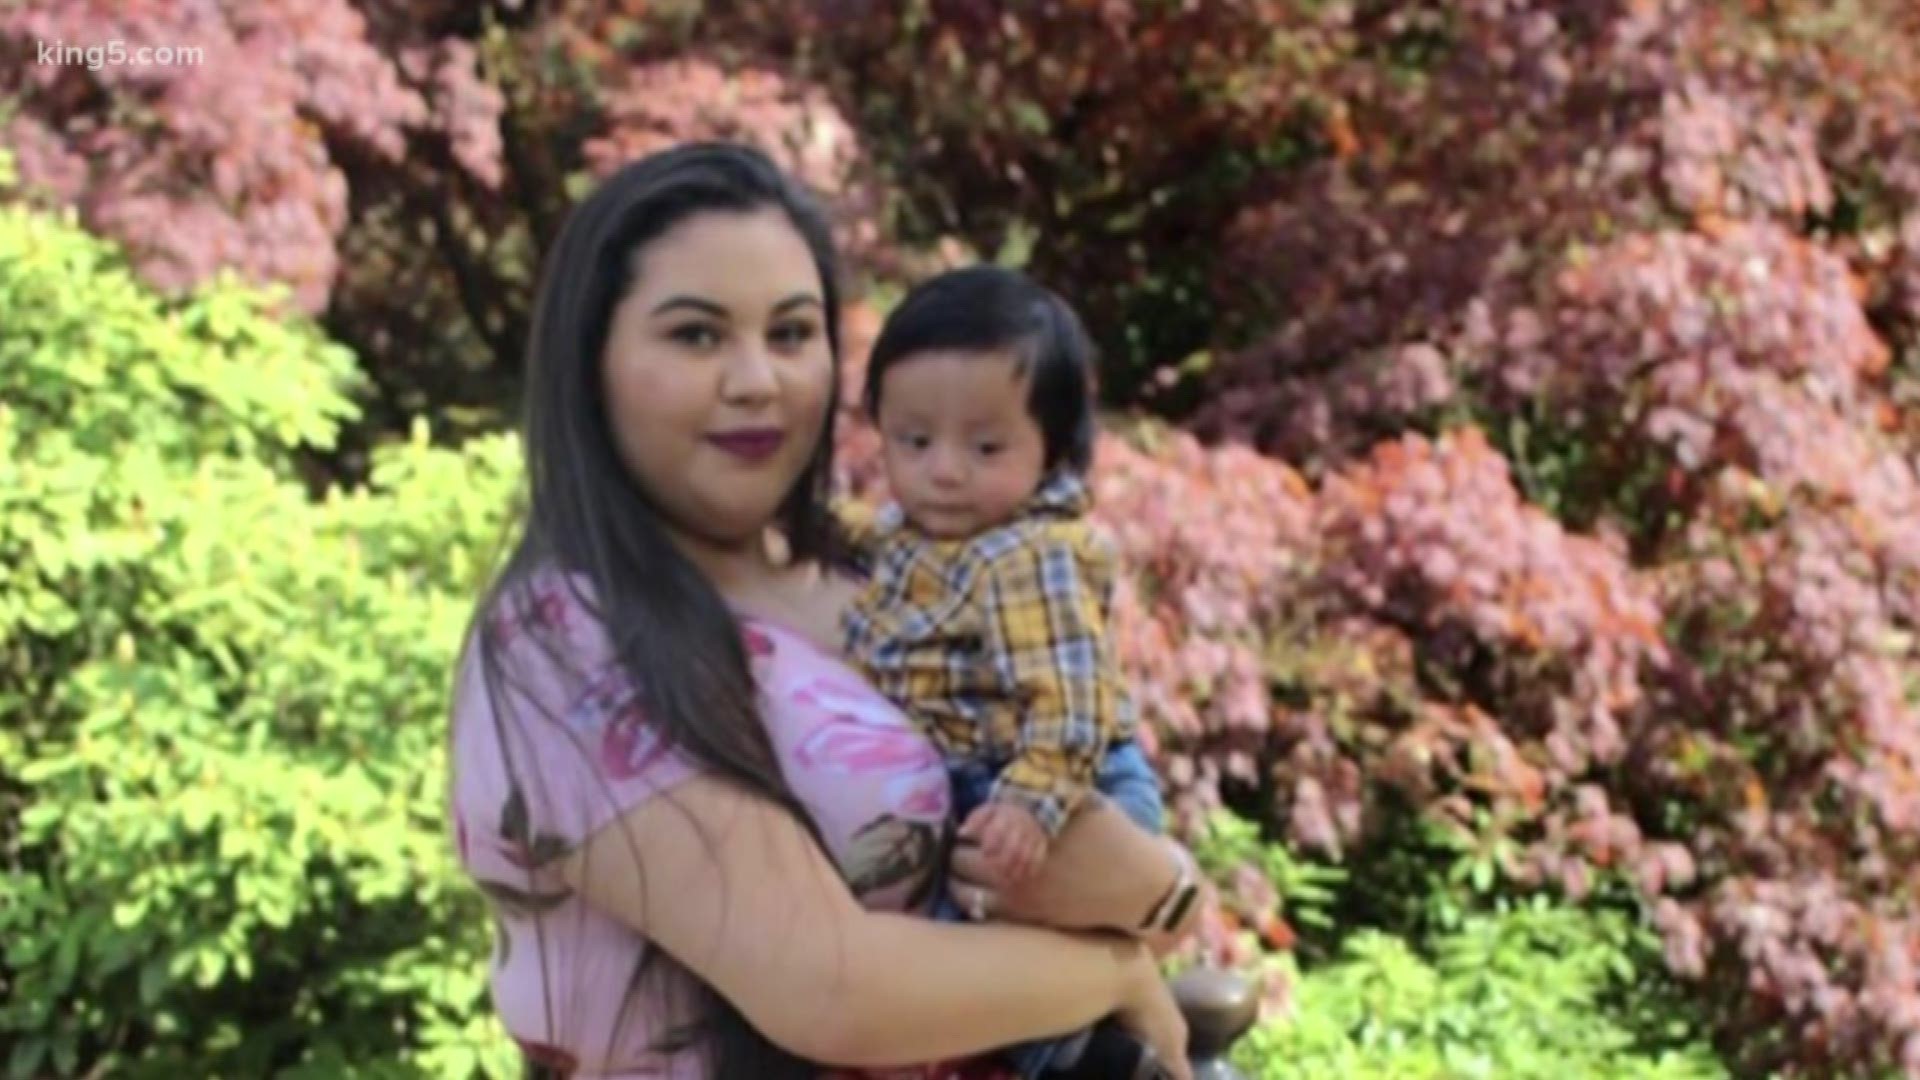 Tukwila police said a car crossed the center line smashing headfirst into a car carrying Amairani Uribe-Beltran and her one-year old, Mateo.